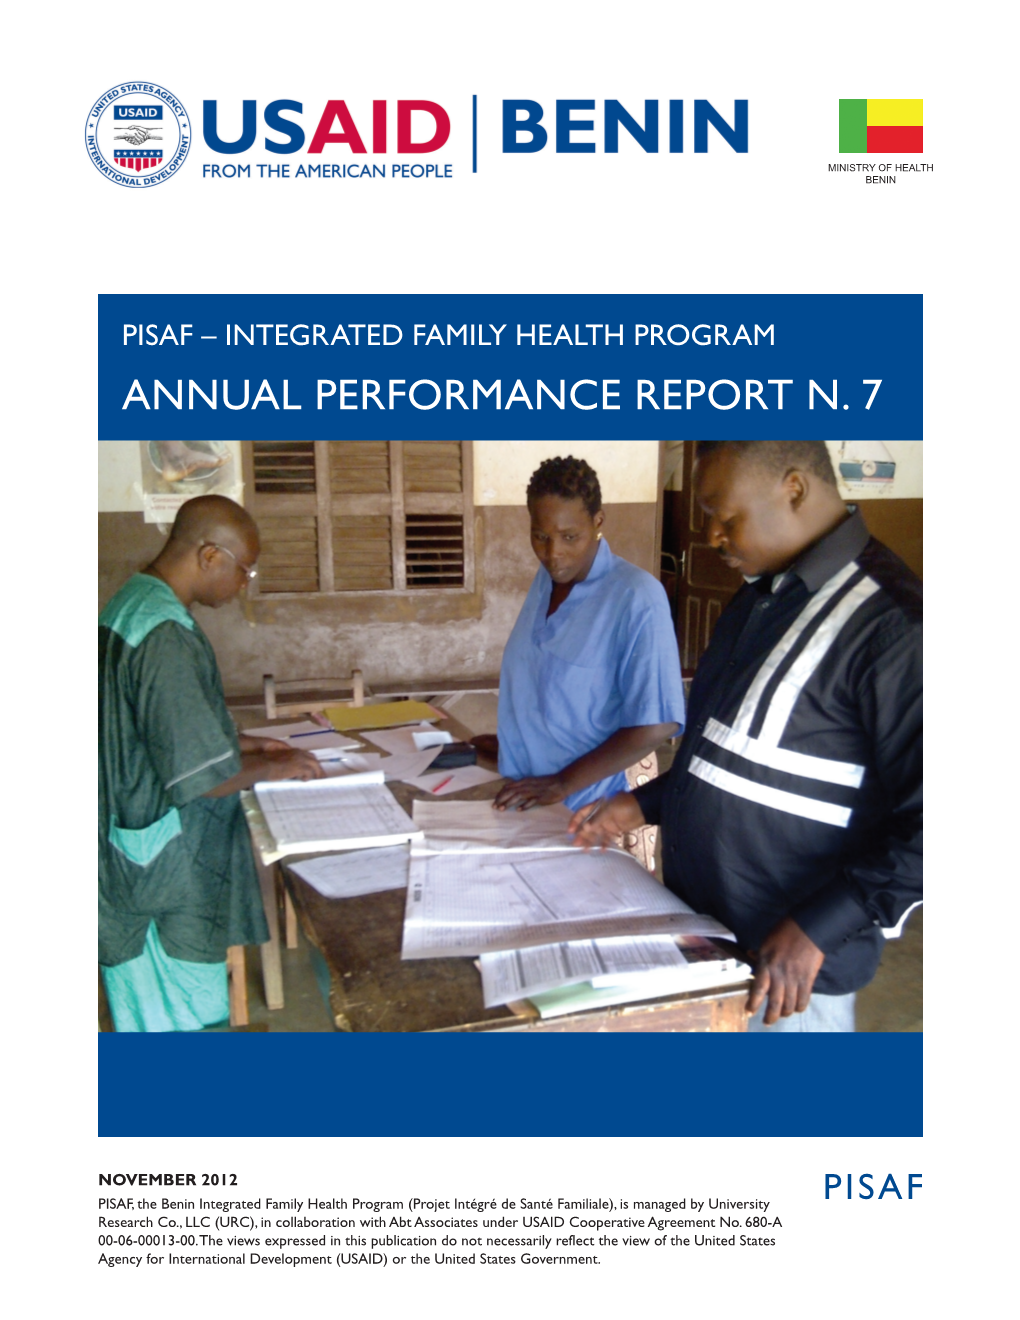 Integrated Family Health Program Annual Performance Report N